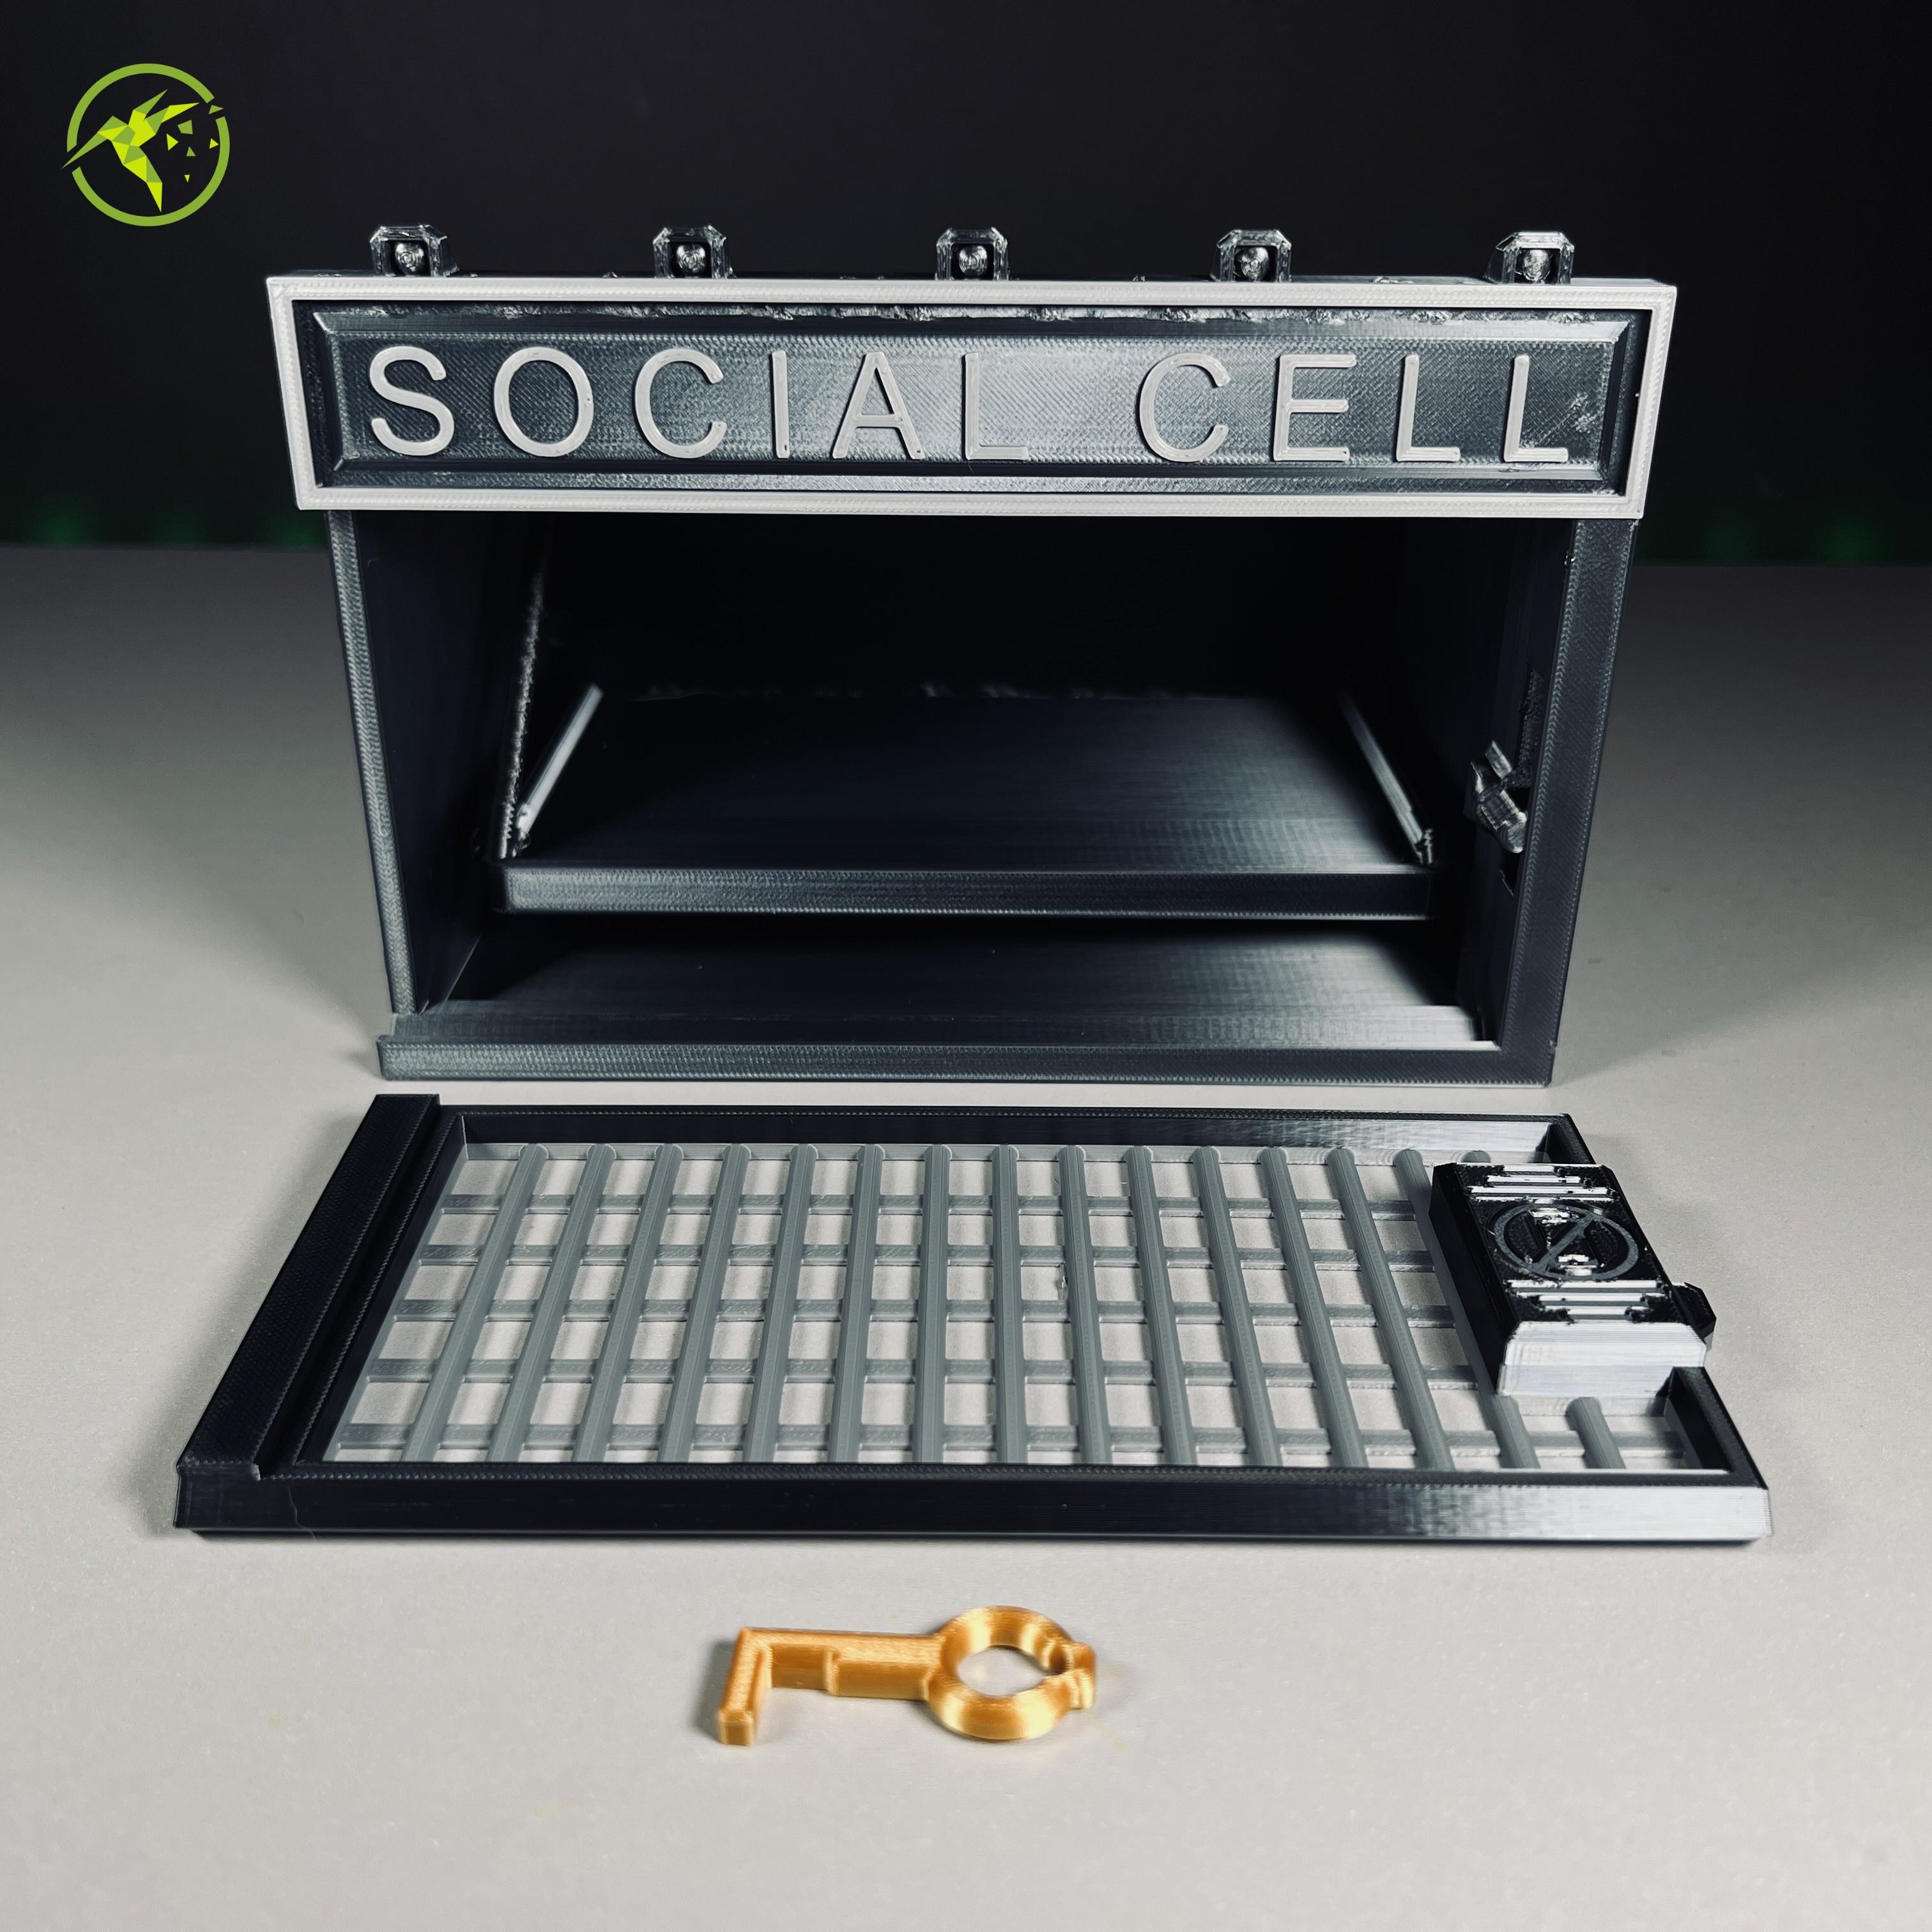 The Social Cell - Smartphone Jail Cell, Phone Storage 3d model